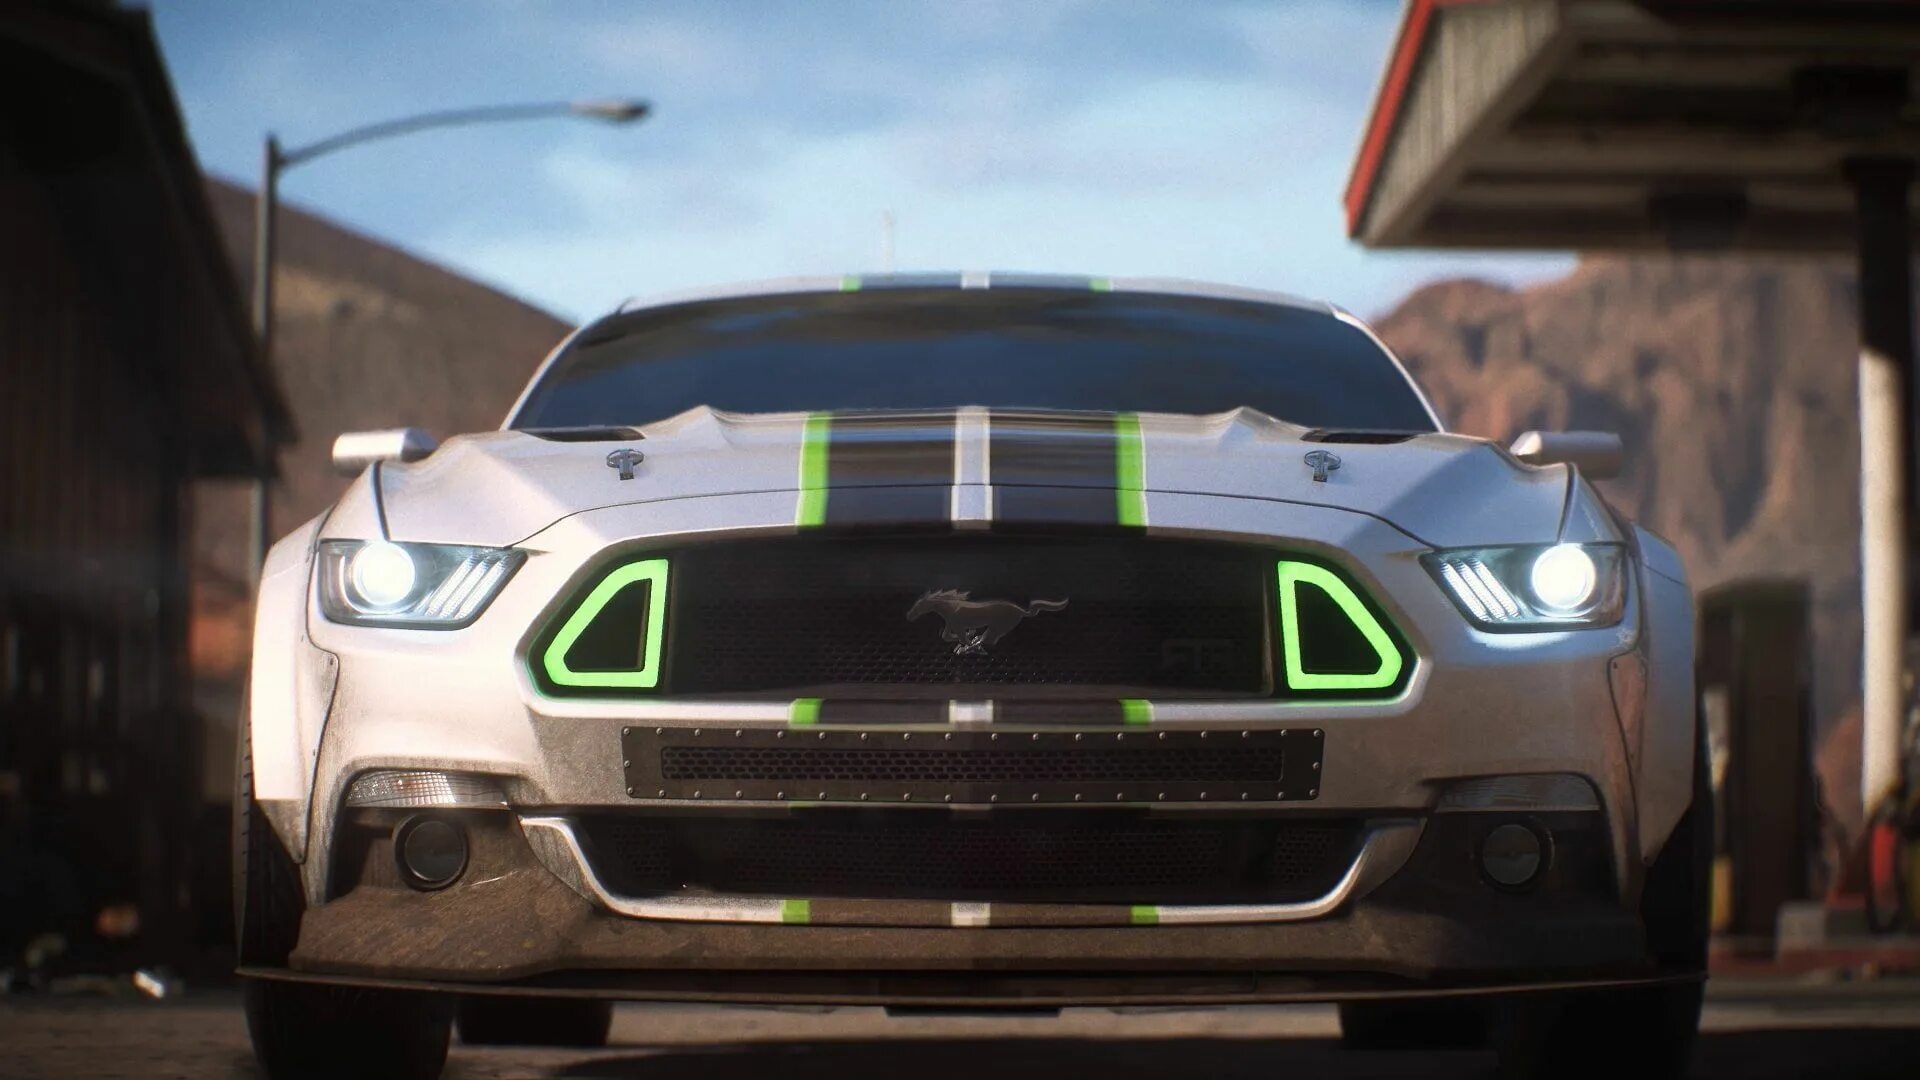 Мустанг payback. Need for Speed Payback Ford Mustang. Ford Mustang NFS Payback. Ford Mustang 2017 NFS. NFS Ford Mustang gt.